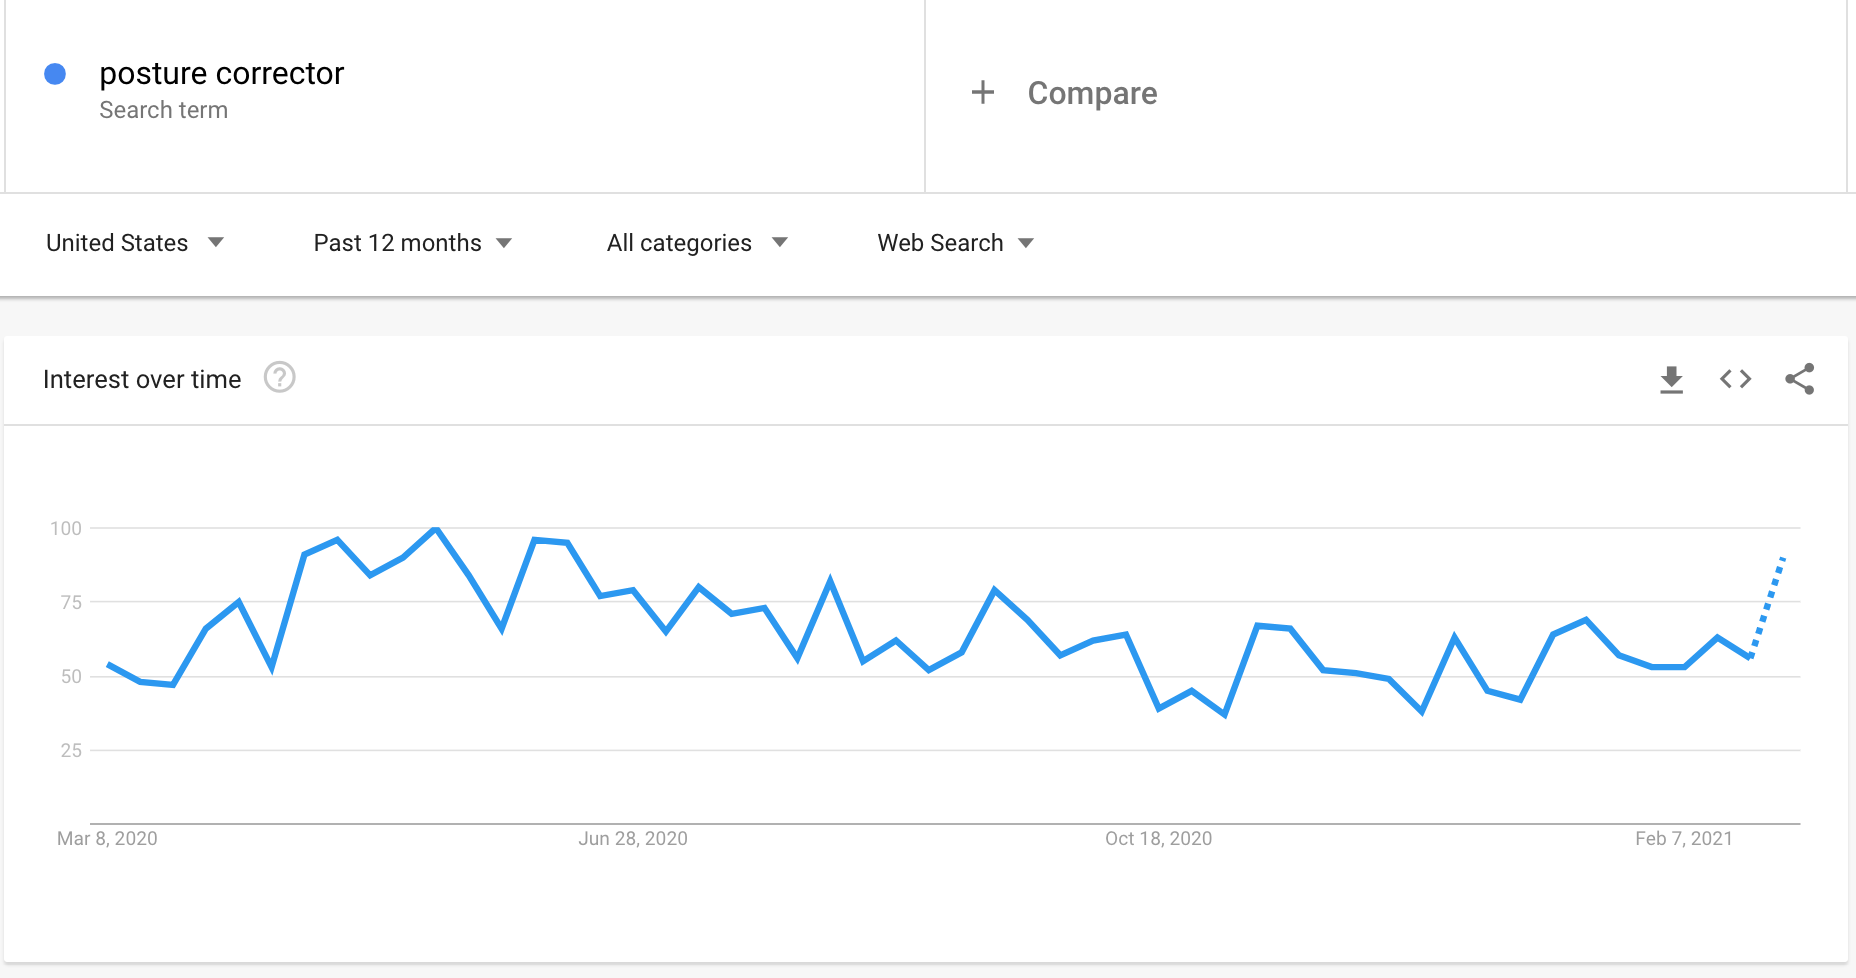 Google Trends graph showing the interest in posture correctors